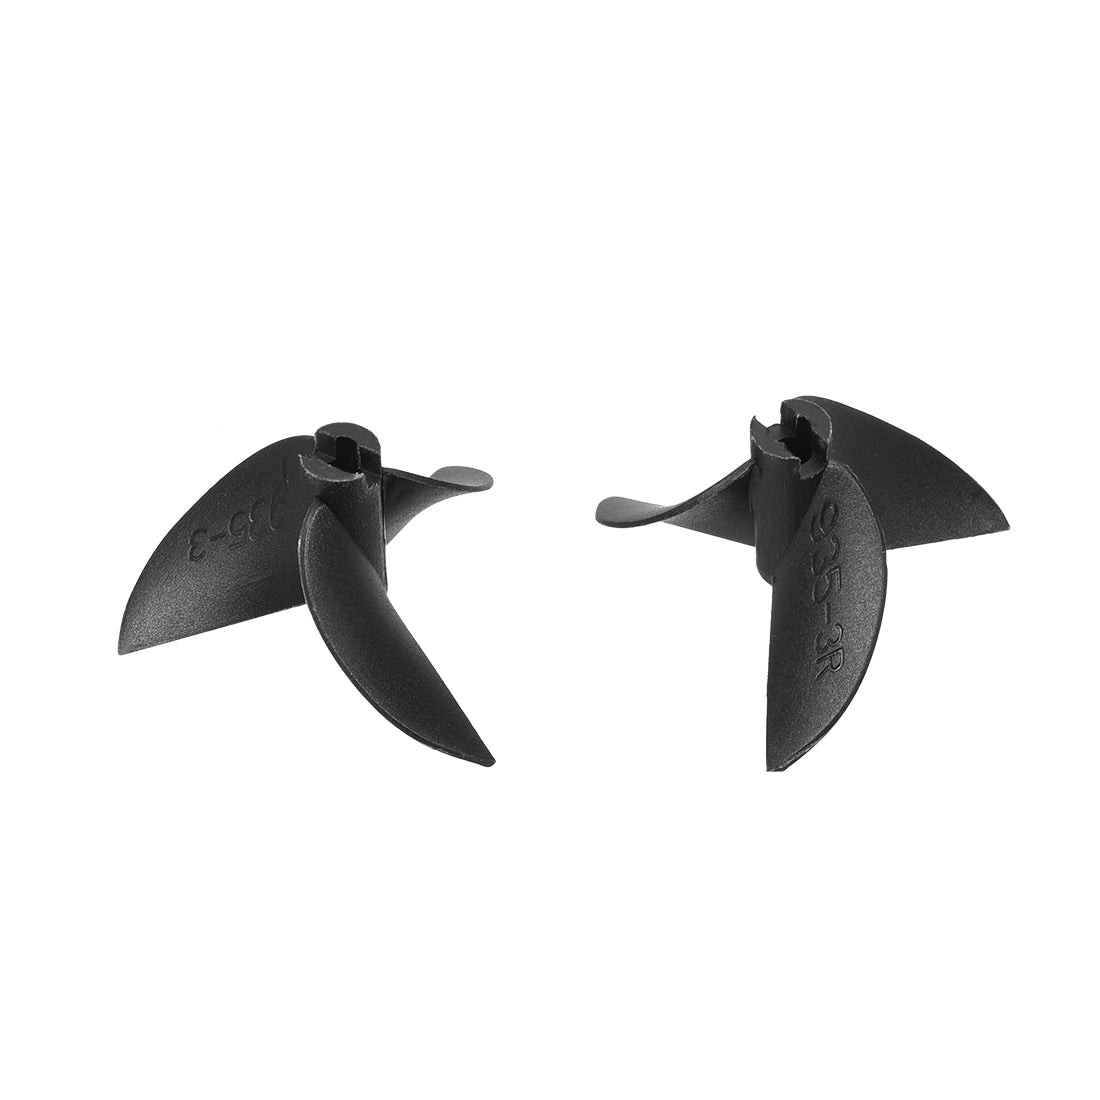 uxcell Uxcell RC Boat CCW/CW Propeller 3.18mm Shaft 3 Vanes 35mm 1.4 P Fan Shape Pastic Black Rotating Propeller Props for RC Boat Pair